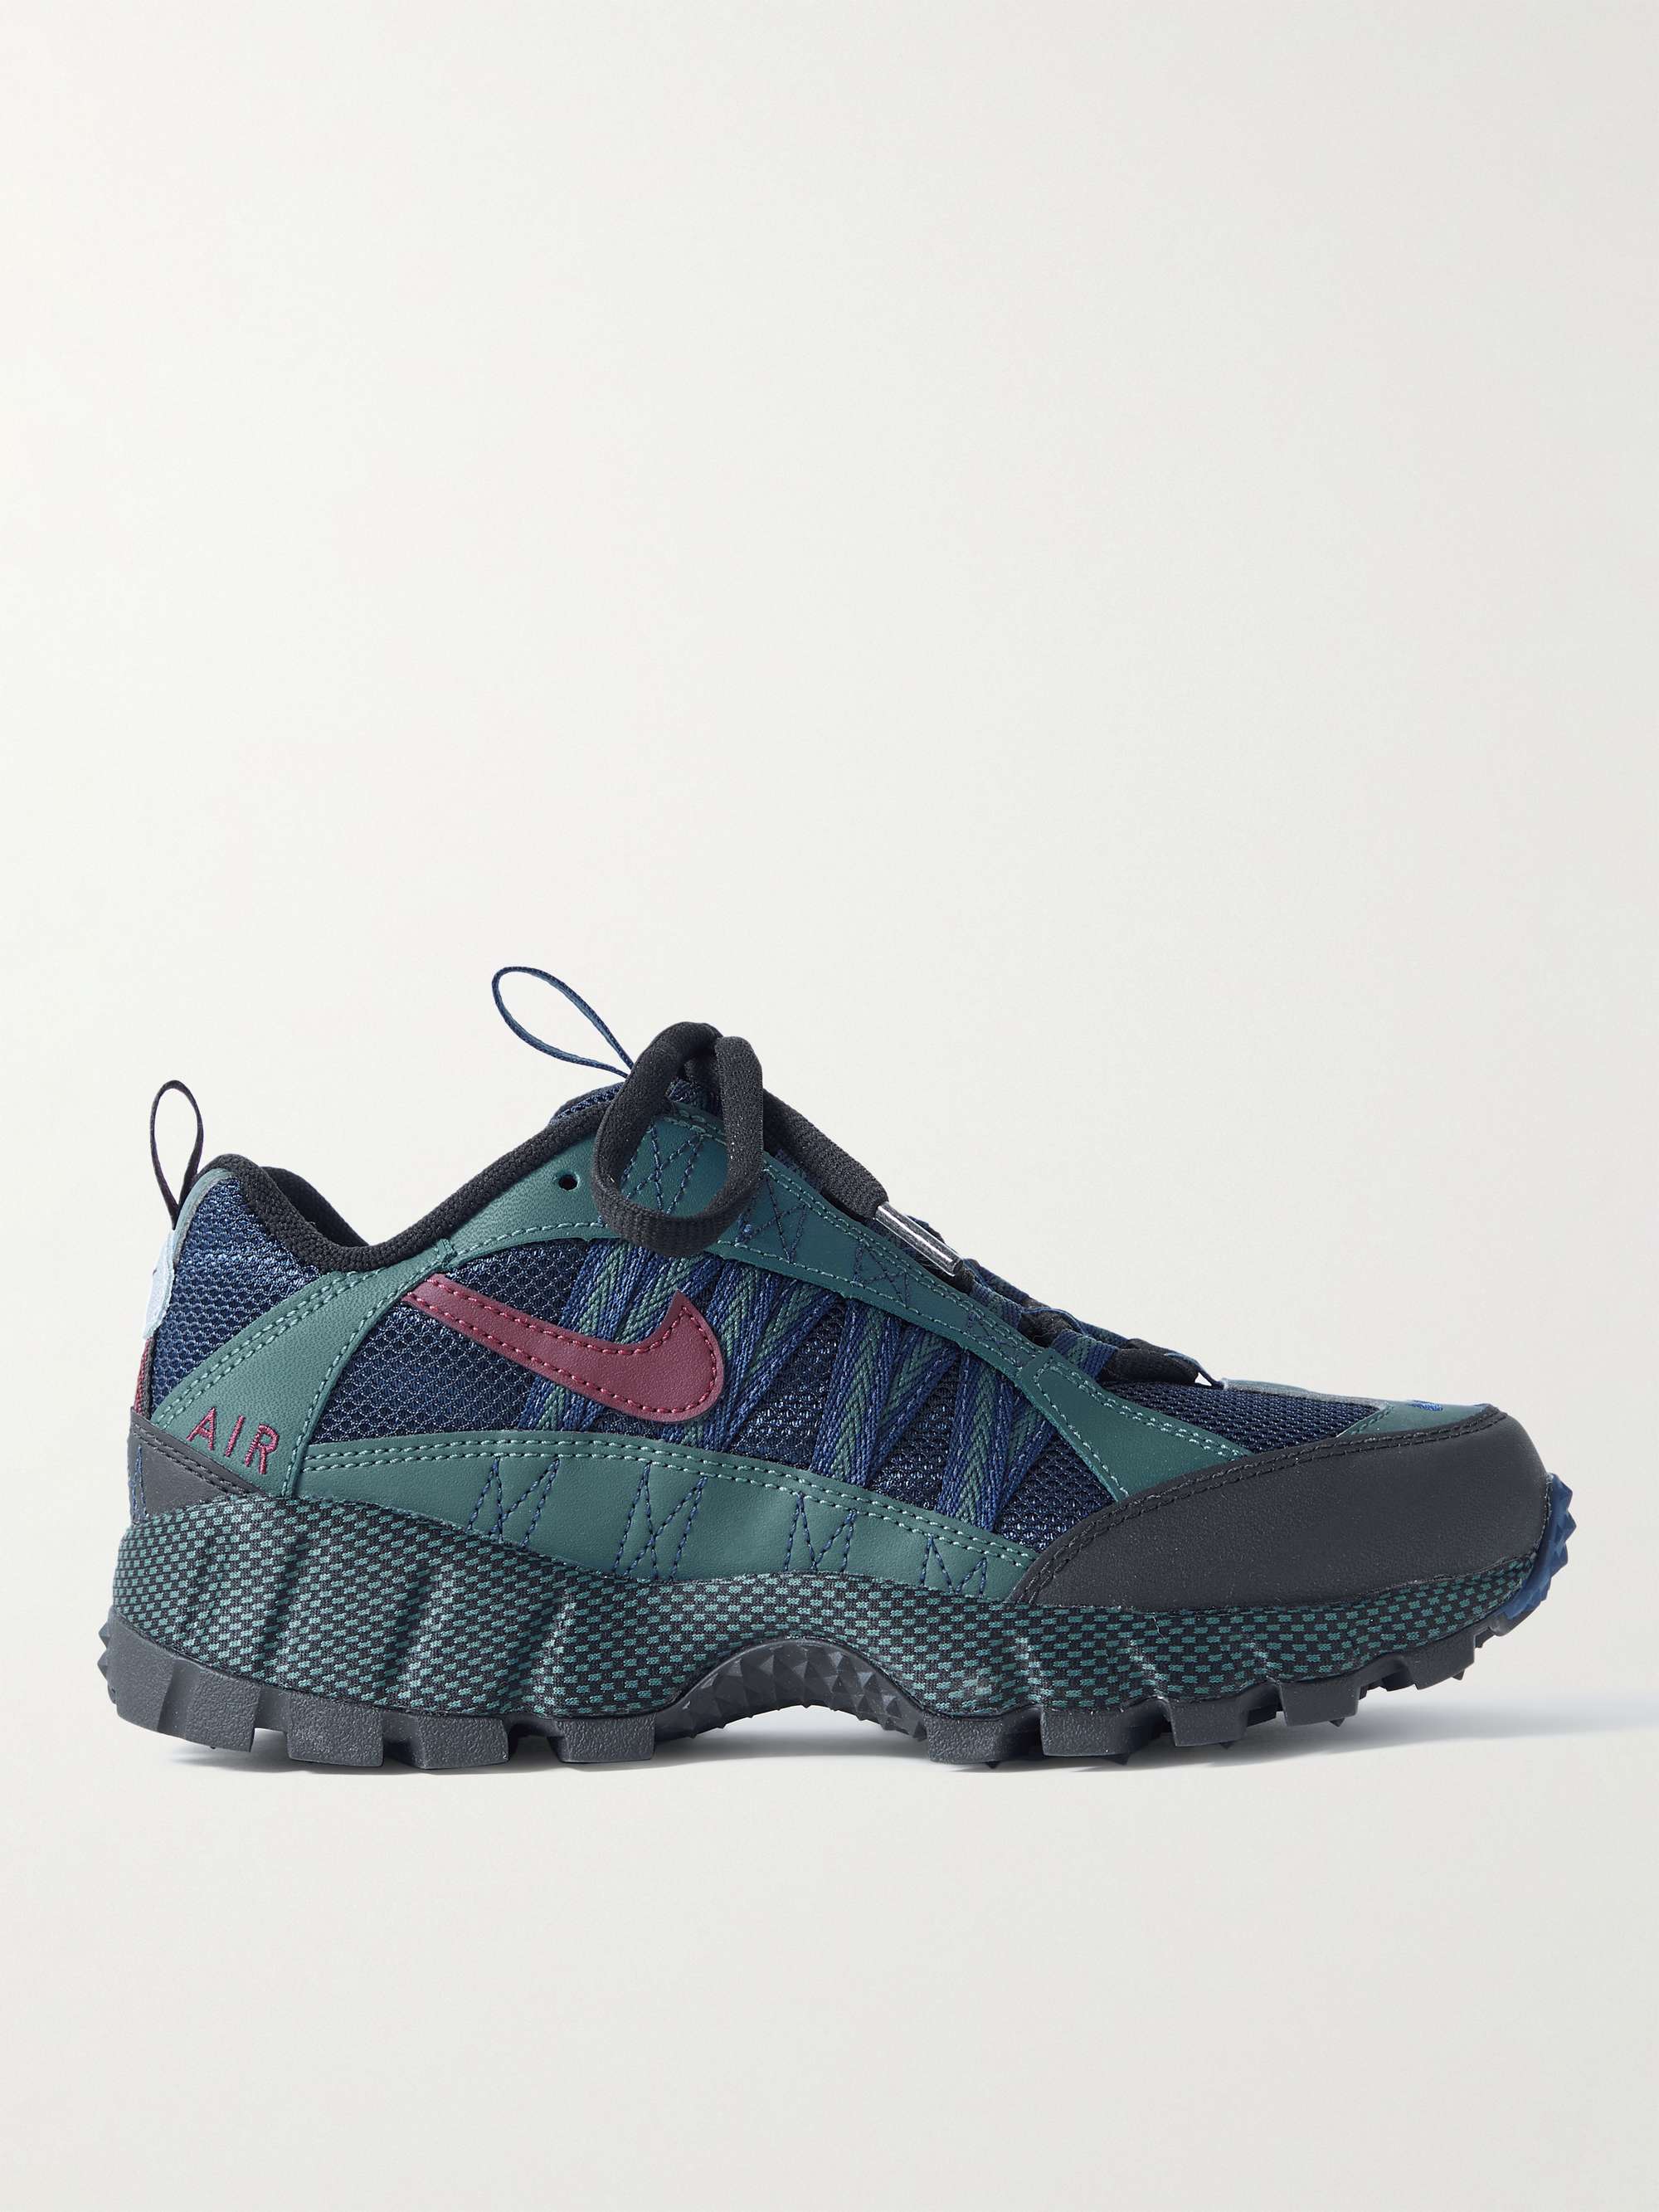 NIKE Air Humara QS Leather-Trimmed Mesh Sneakers | MR PORTER